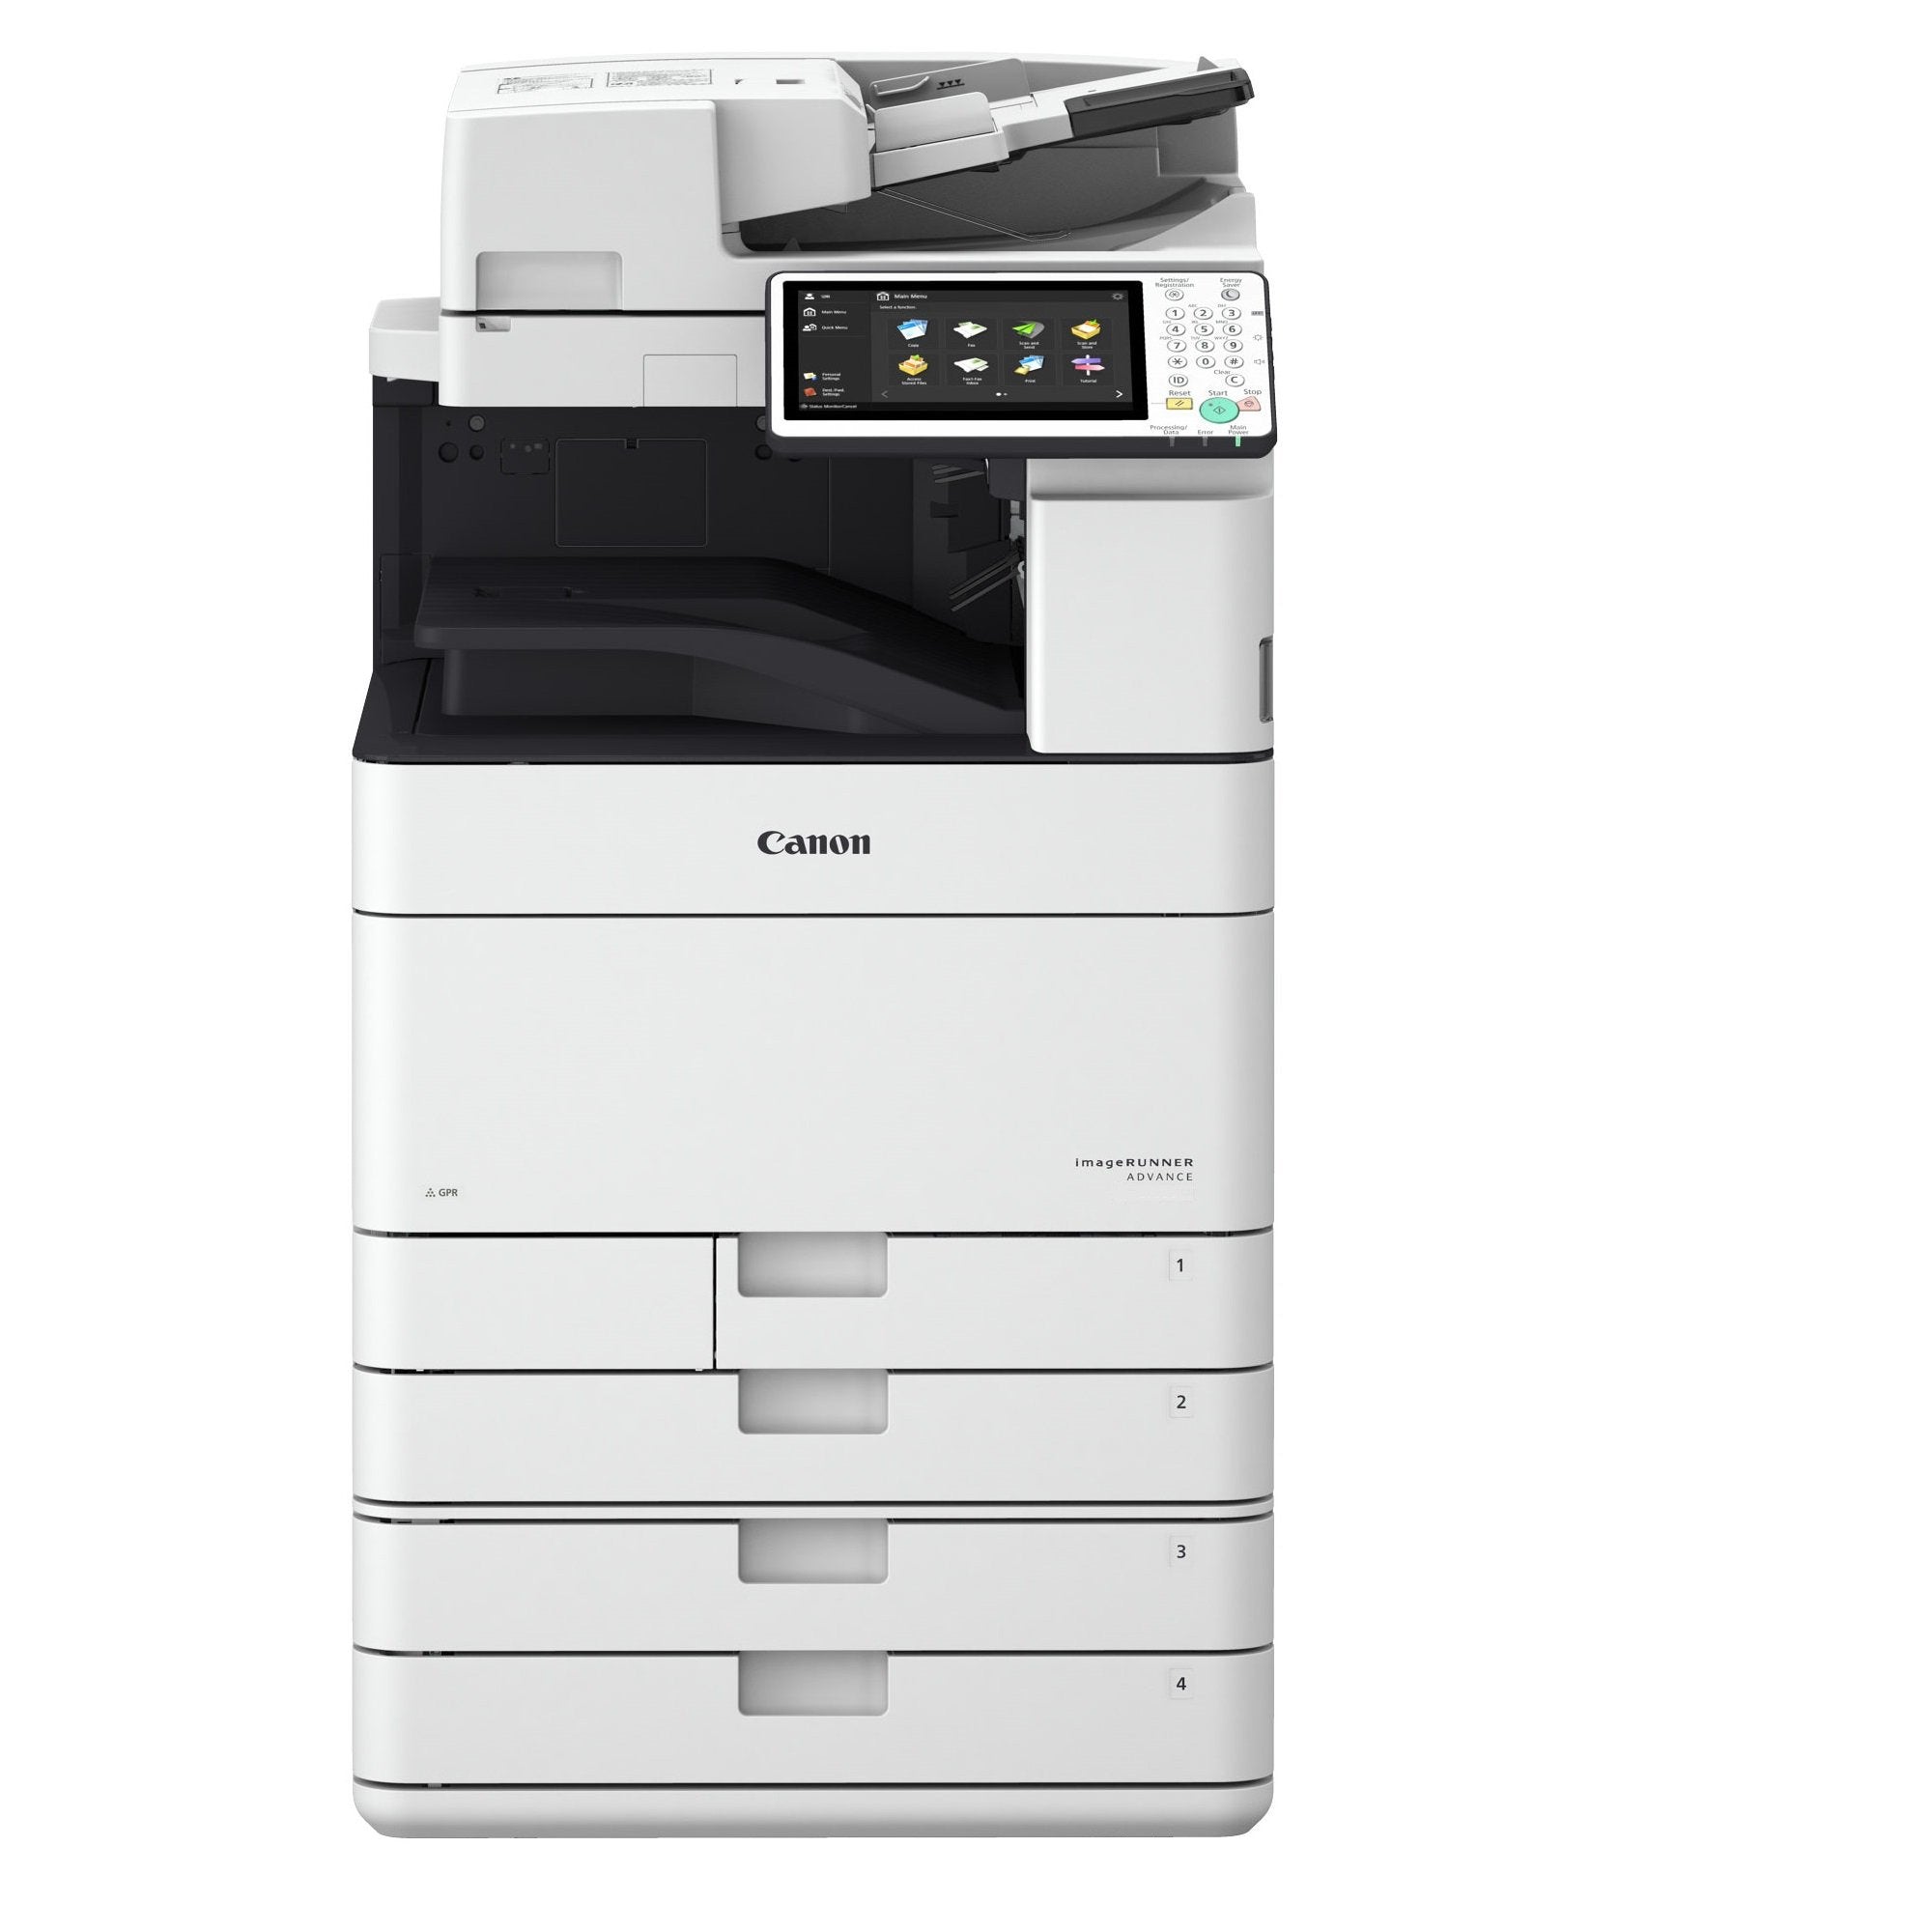 Absolute Toner $56/Month Canon imageRUNNER ADVANCE C5535i Laser Color Multifunction Printer, Copier, Scanner, 12 x 18 For Office | IRAC5535i Showroom Color Copiers